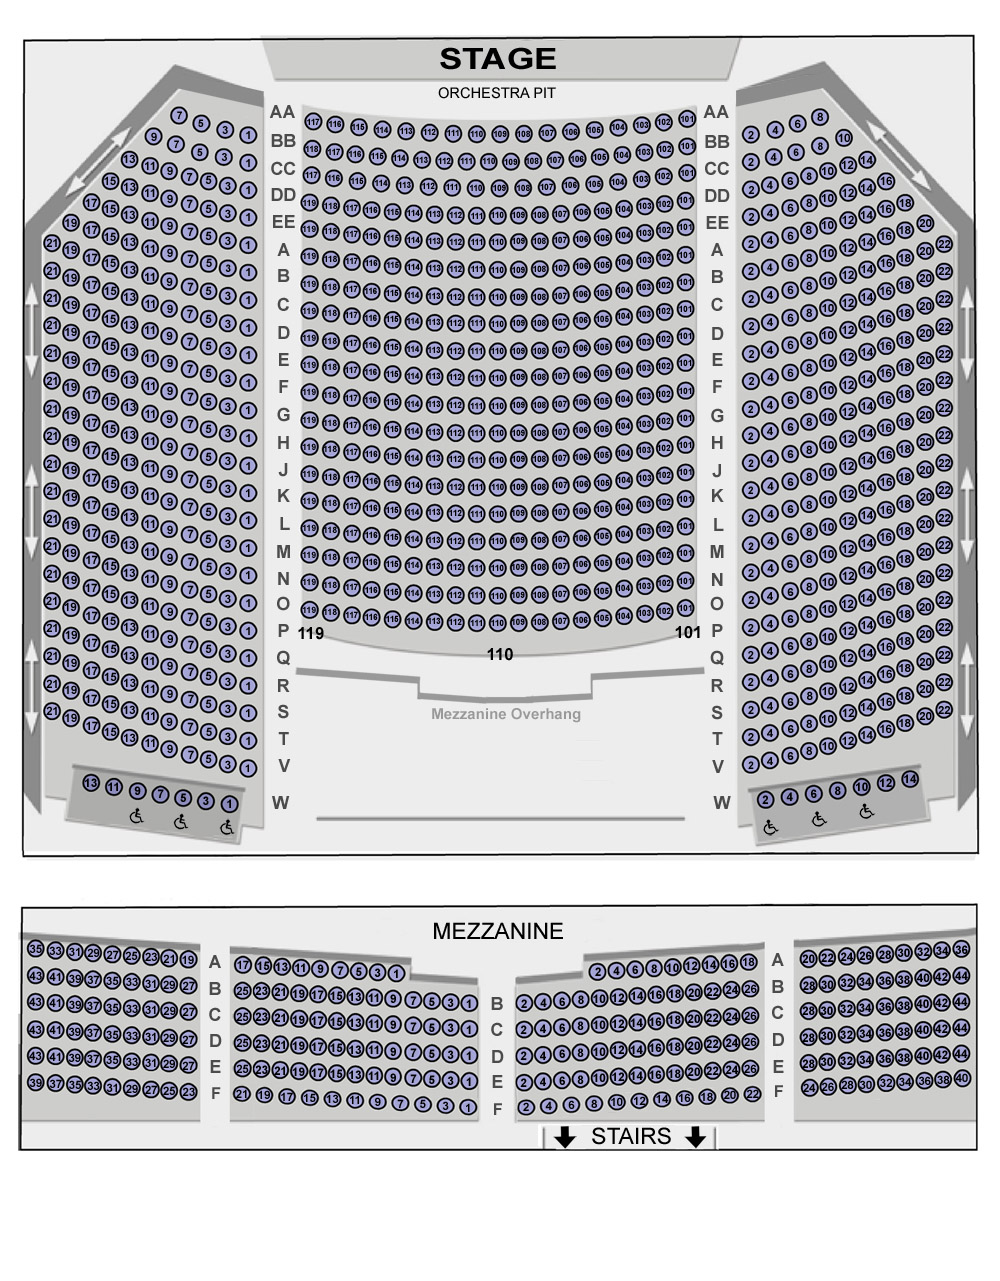 Northport Performing Arts Center Seating Chart